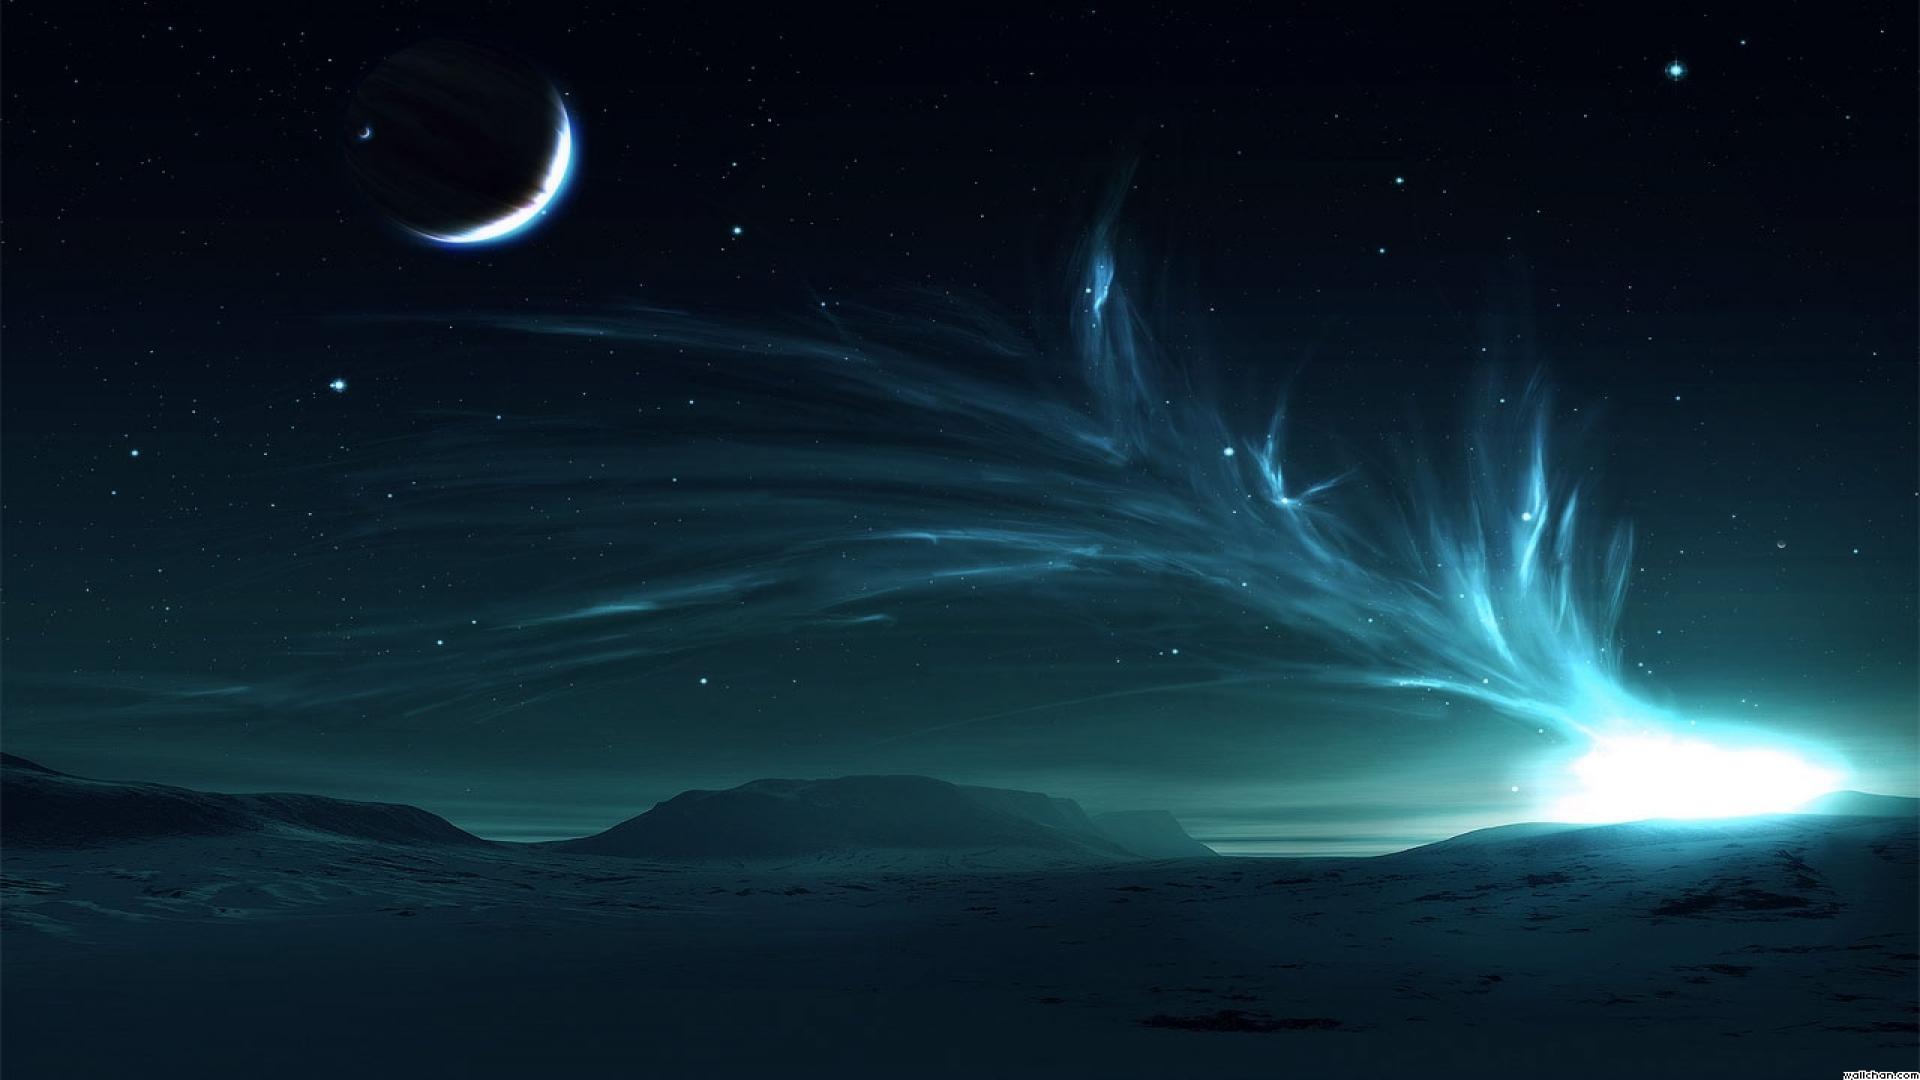 Space wallpaper sky abstract wallpaper 1920x1080 px